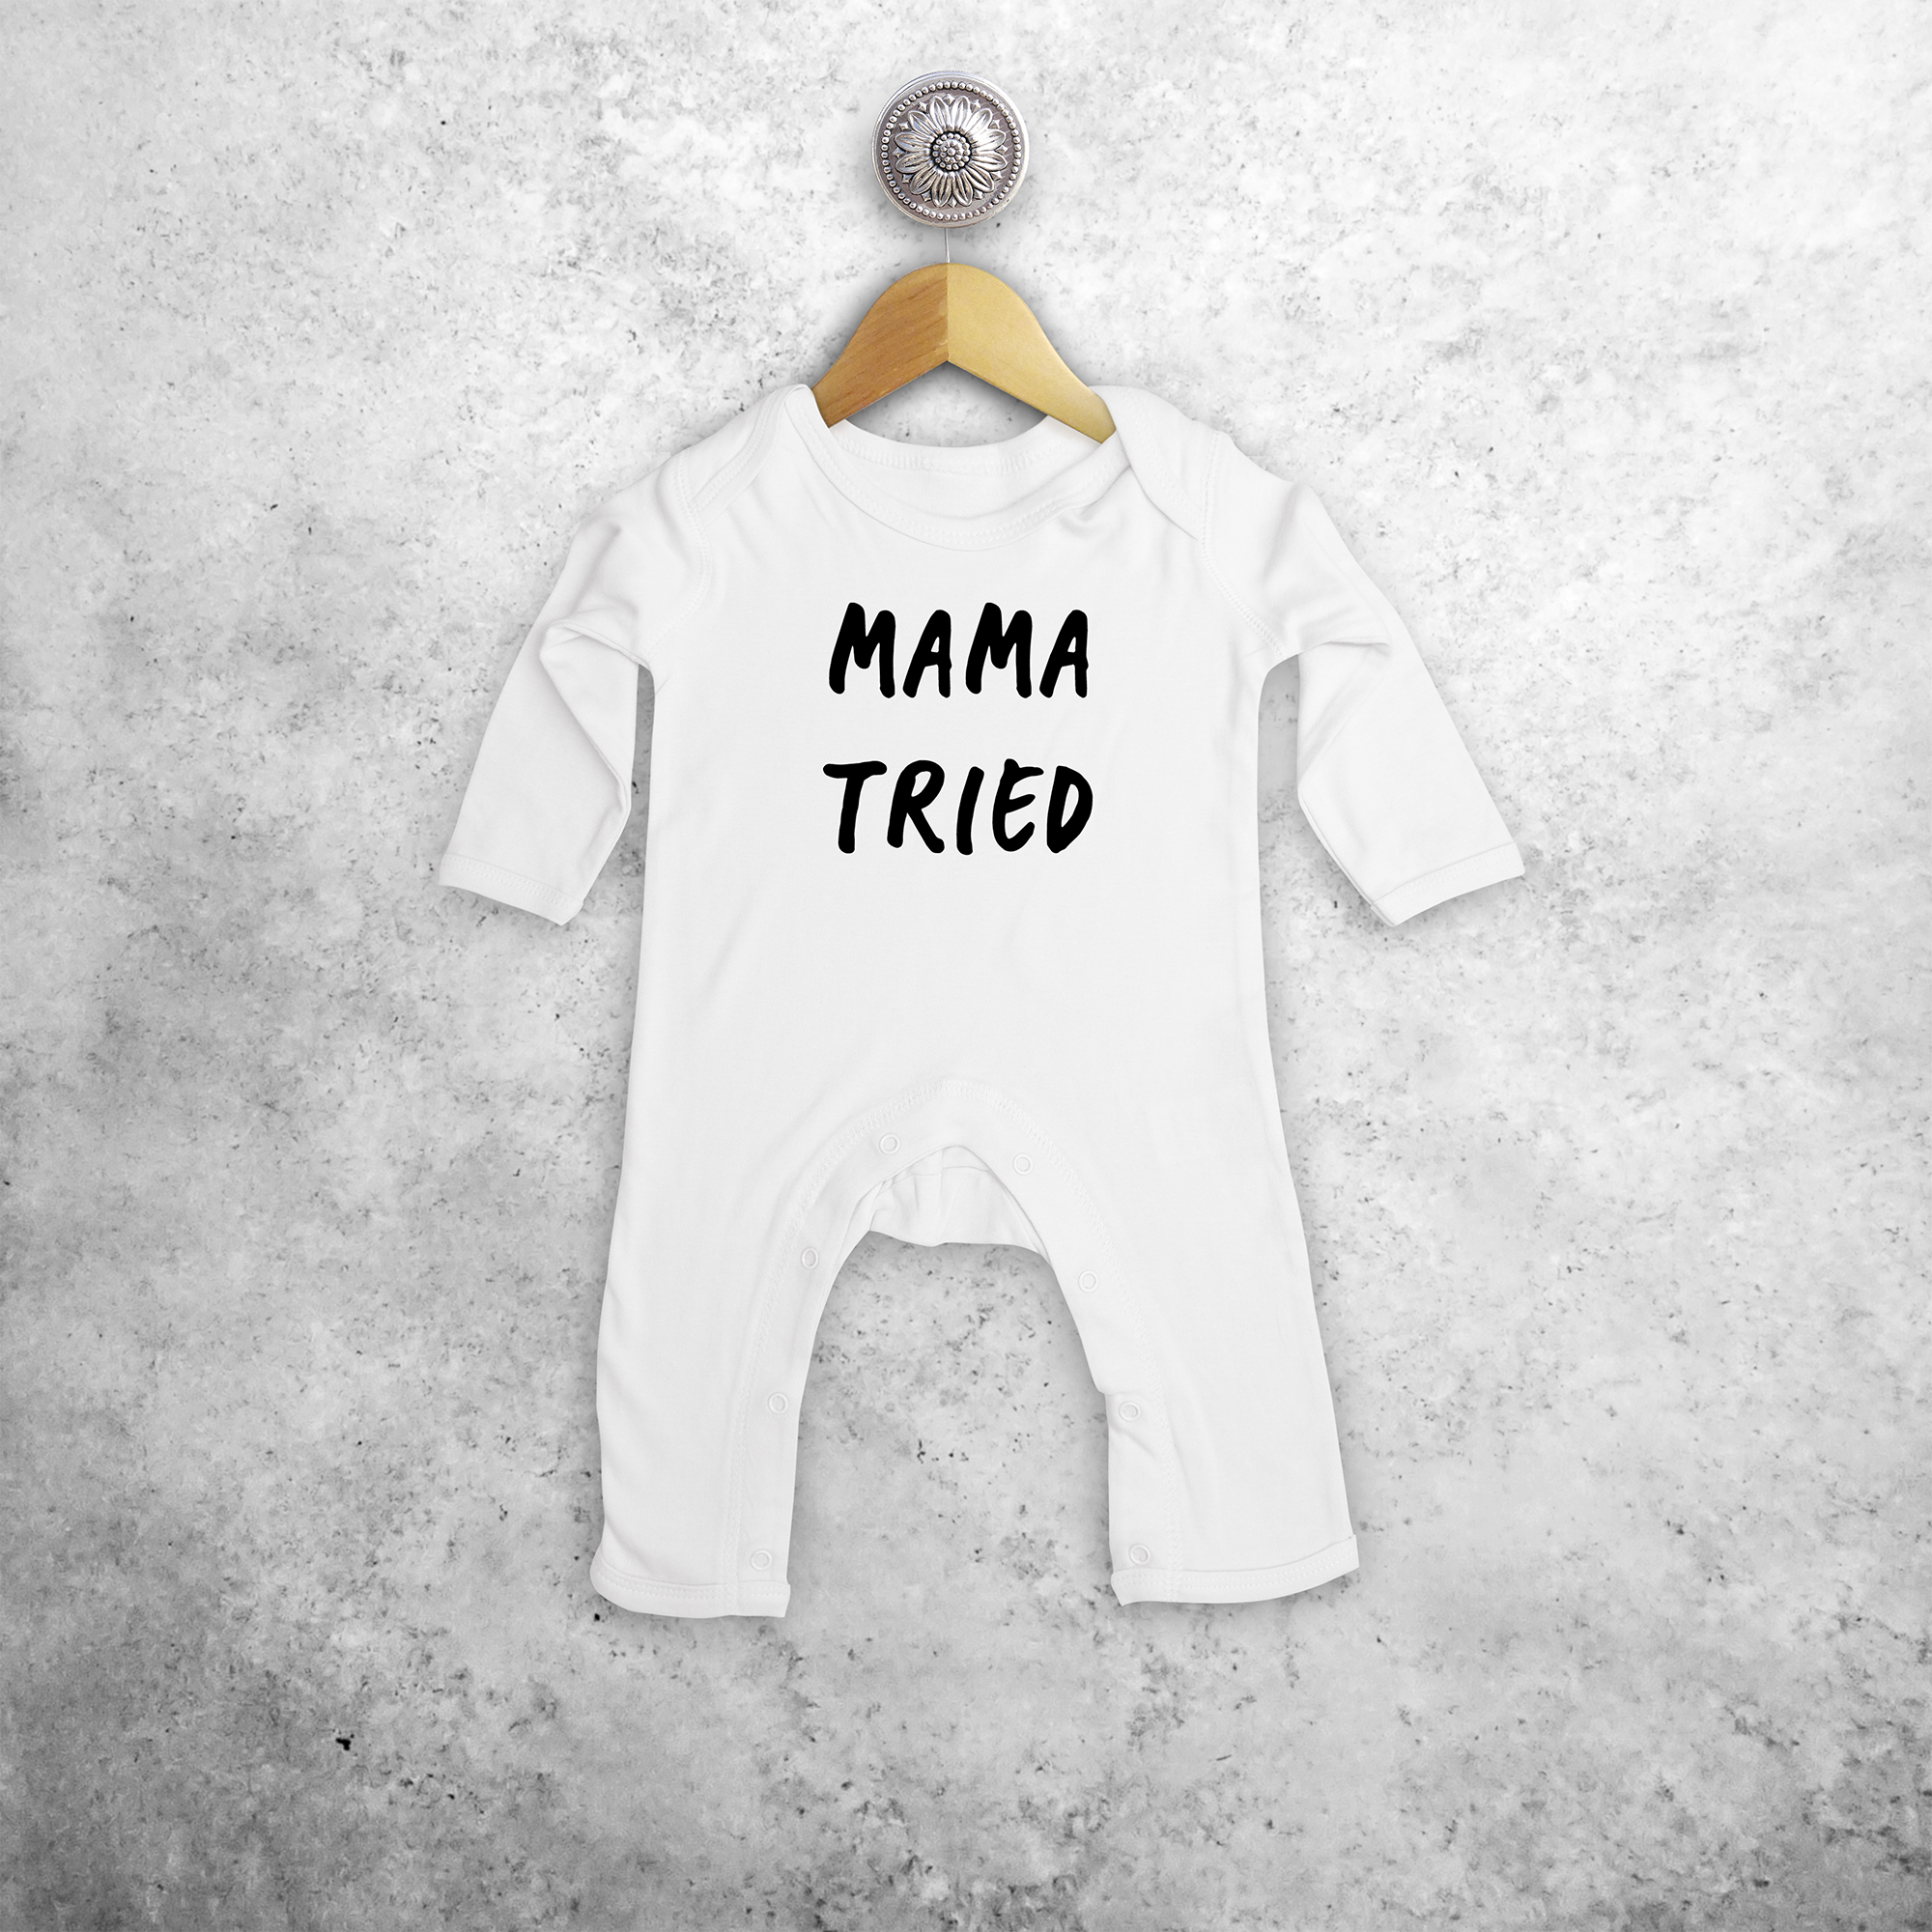 'Mama tried' baby romper